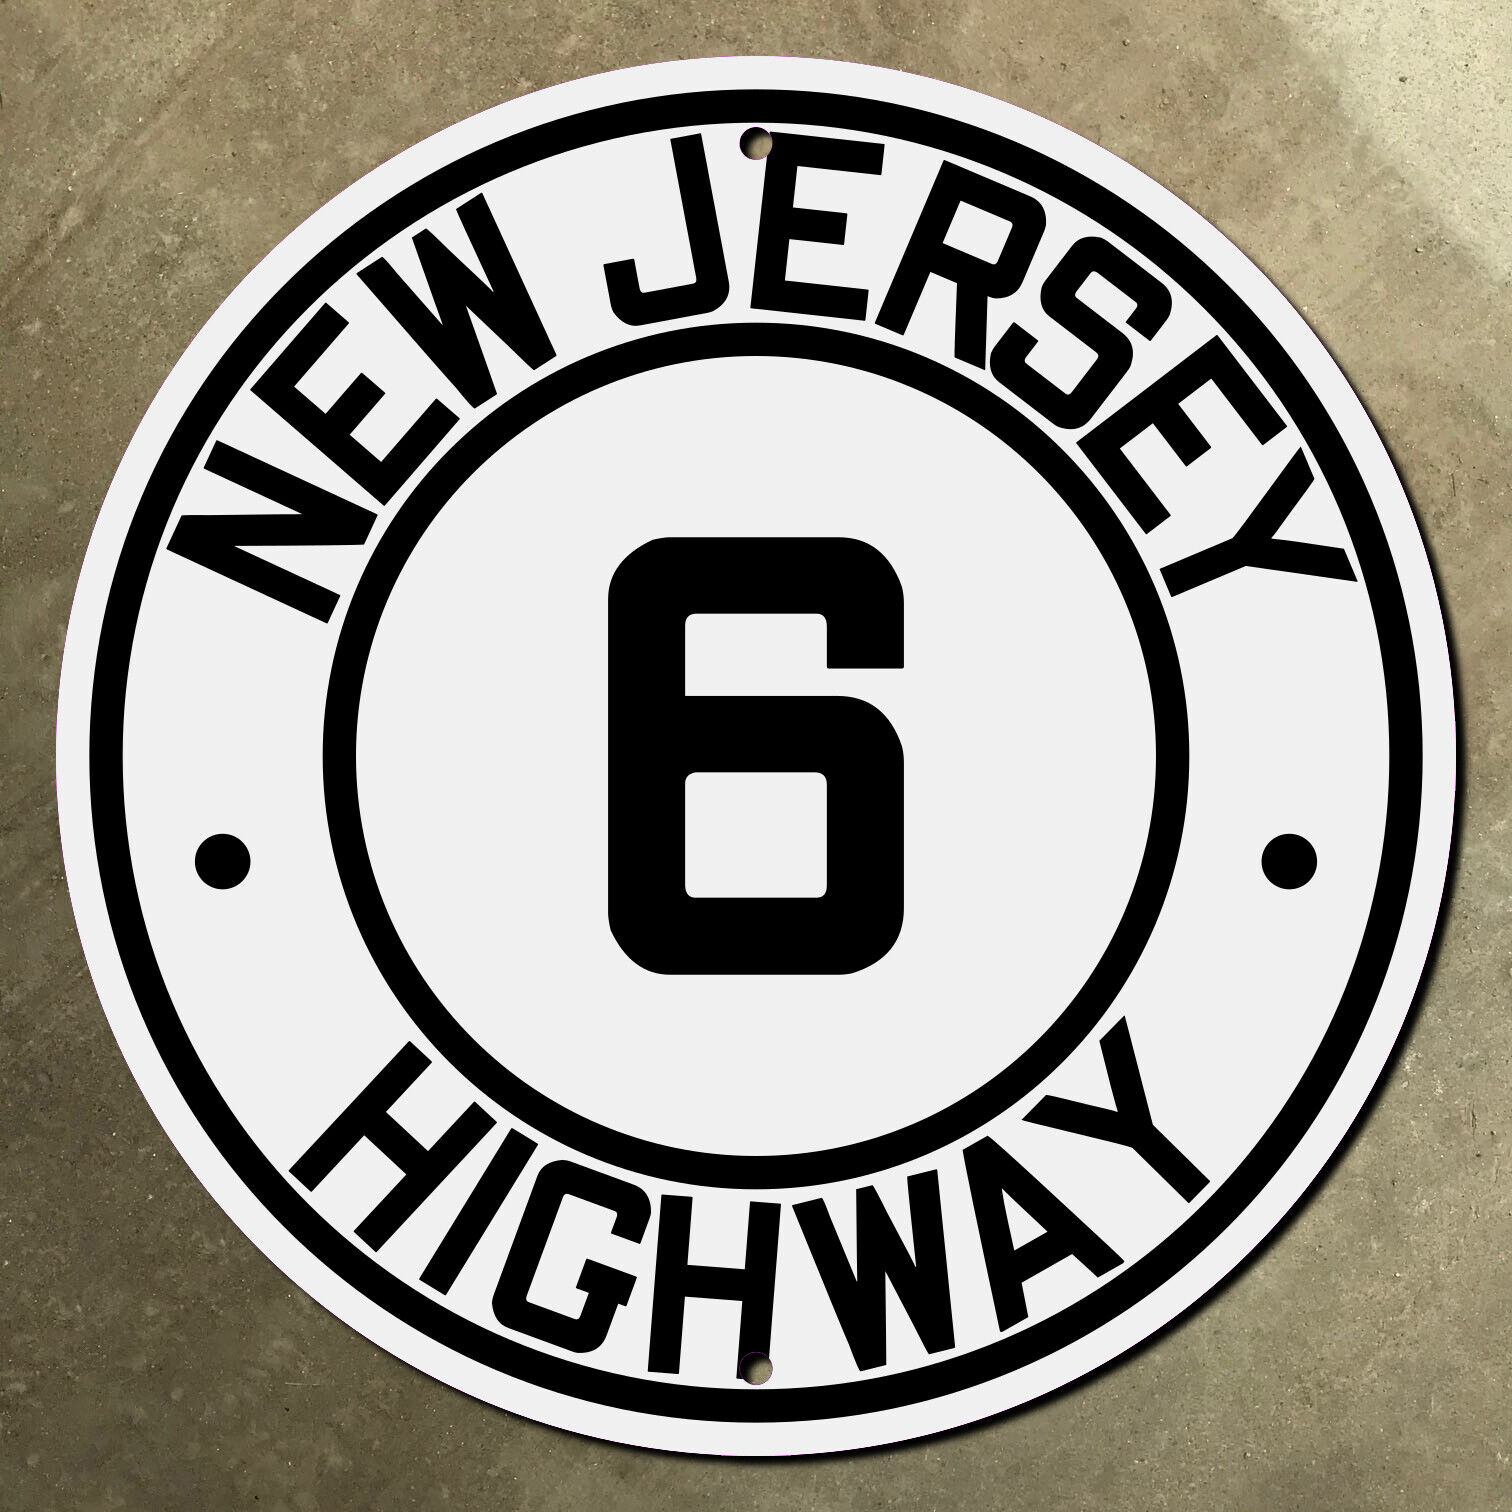 New Jersey state route 6 shield highway marker road sign 1927